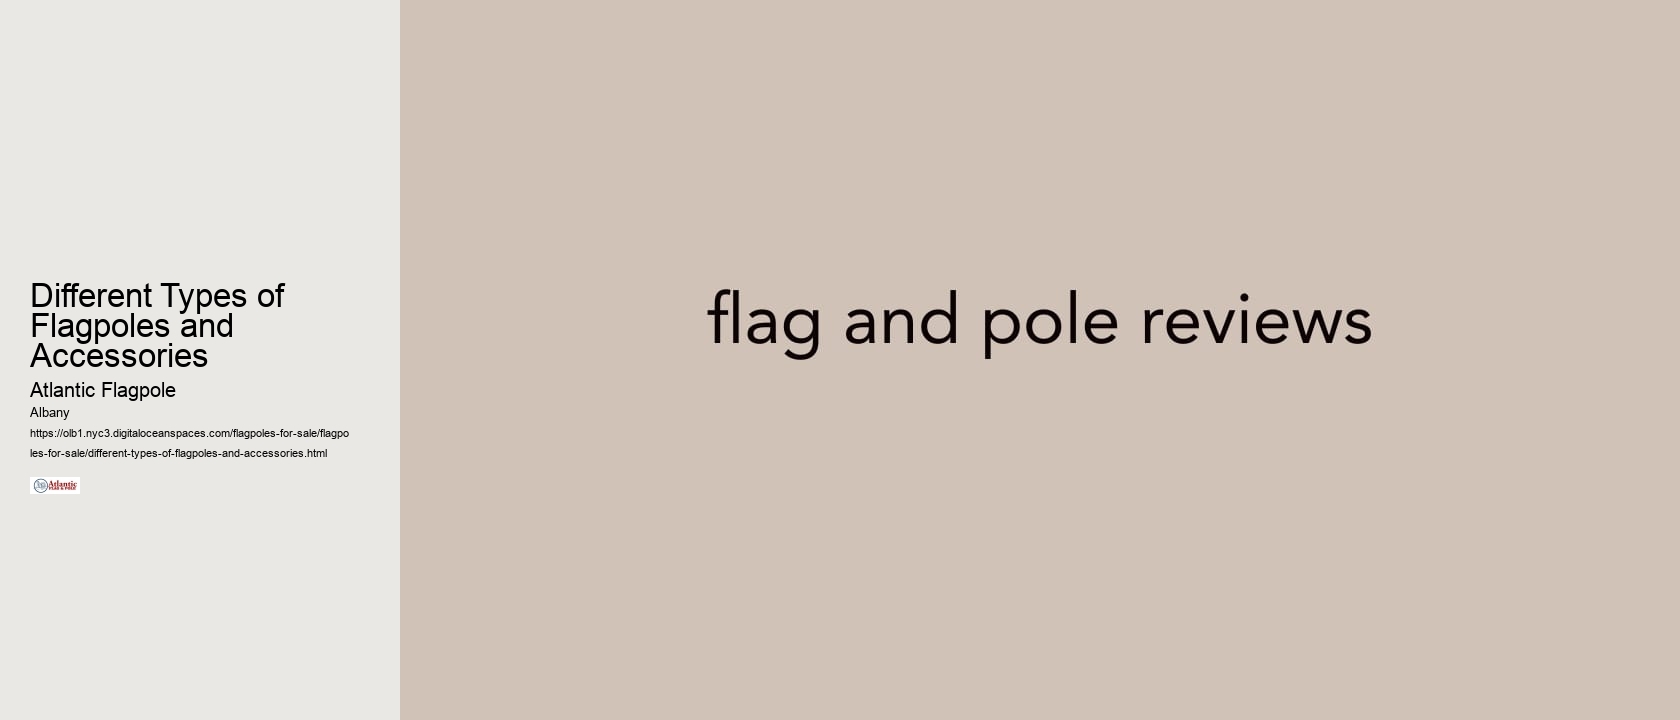 Different Types of Flagpoles and Accessories